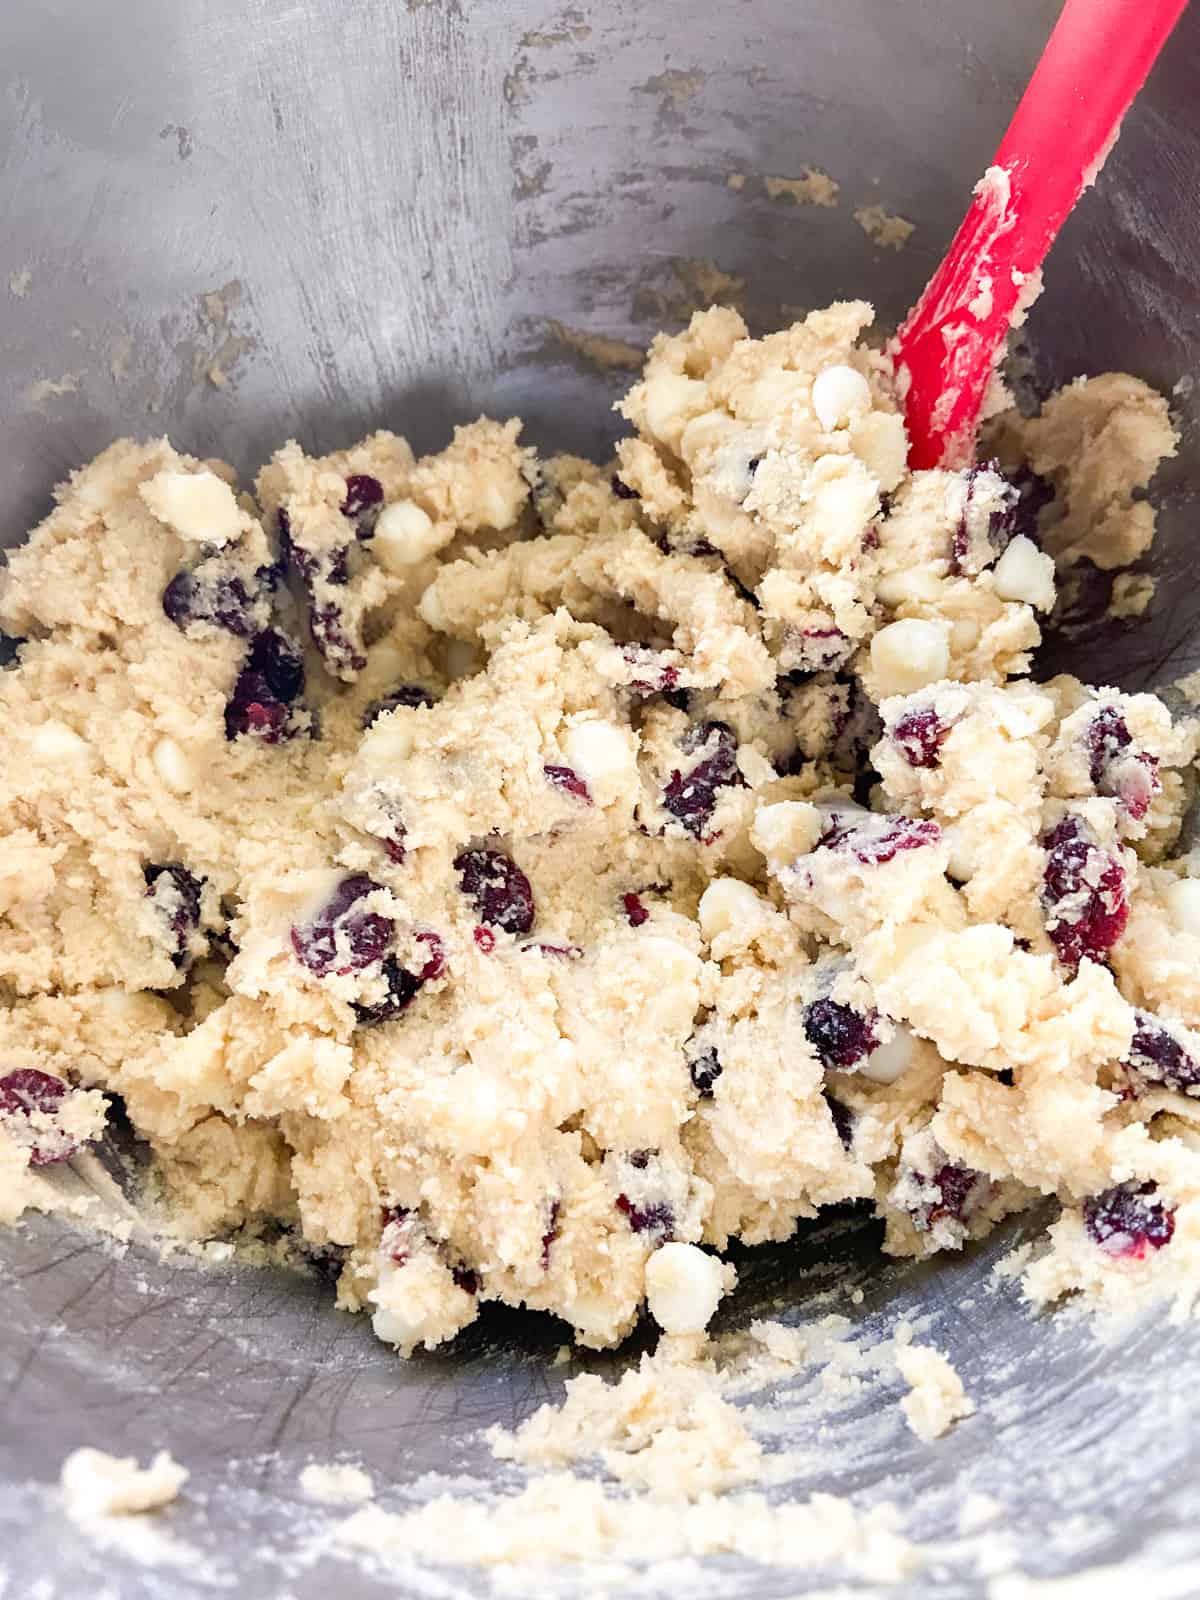 Cookie dough with cranberries and white chocolate chips mixed in.